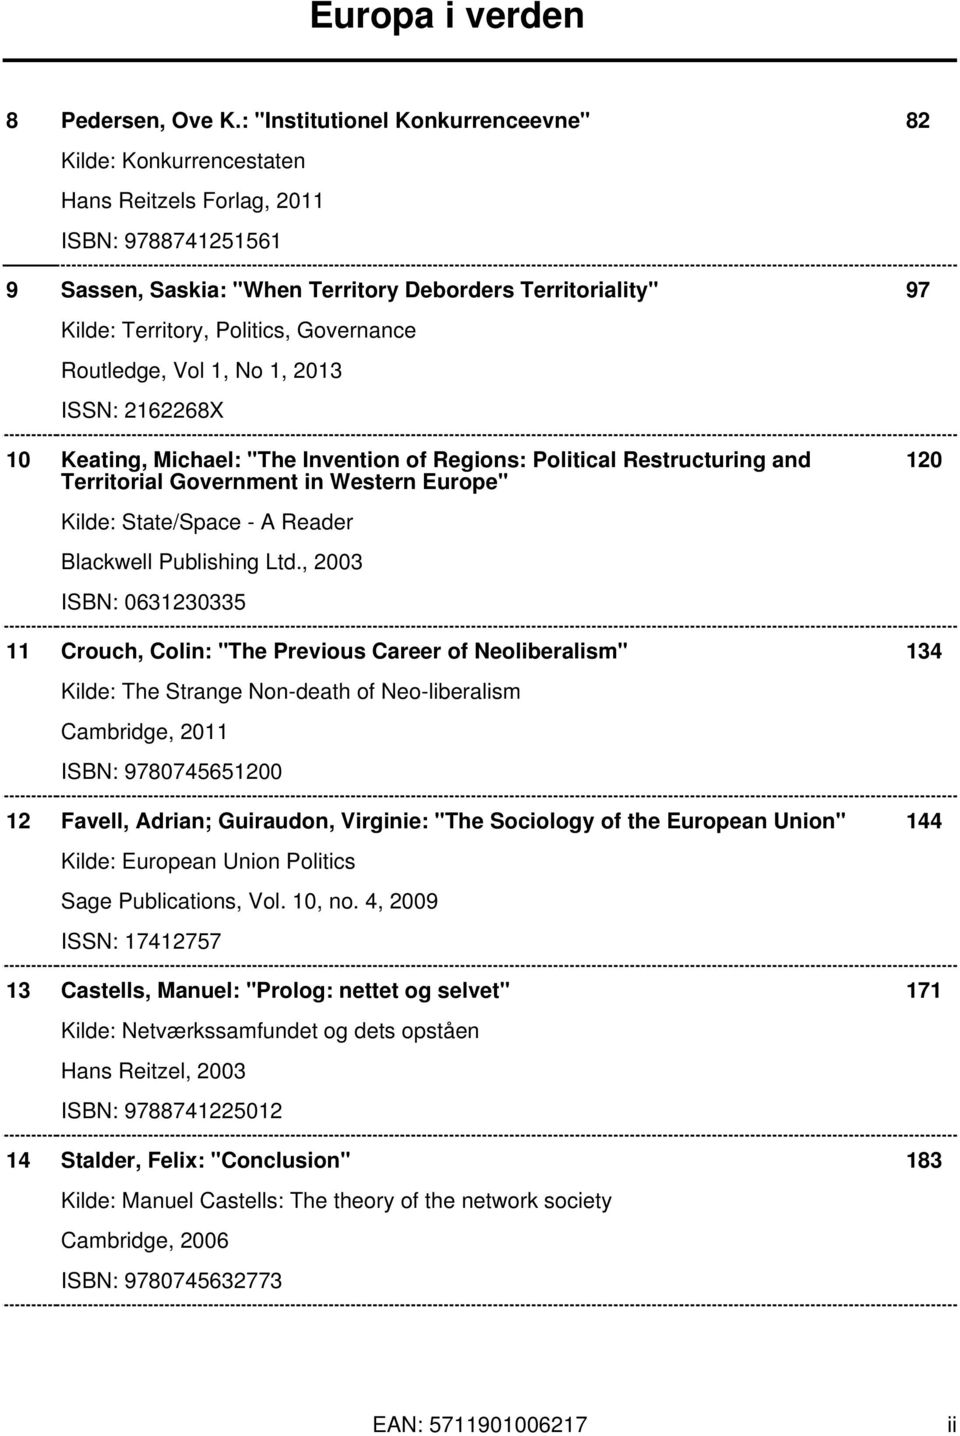 Governance Routledge, Vol 1, No 1, 2013 ISSN: 2162268X 10 Keating, Michael: "The Invention of Regions: Political Restructuring and Territorial Government in Western Europe" 120 Kilde: State/Space - A